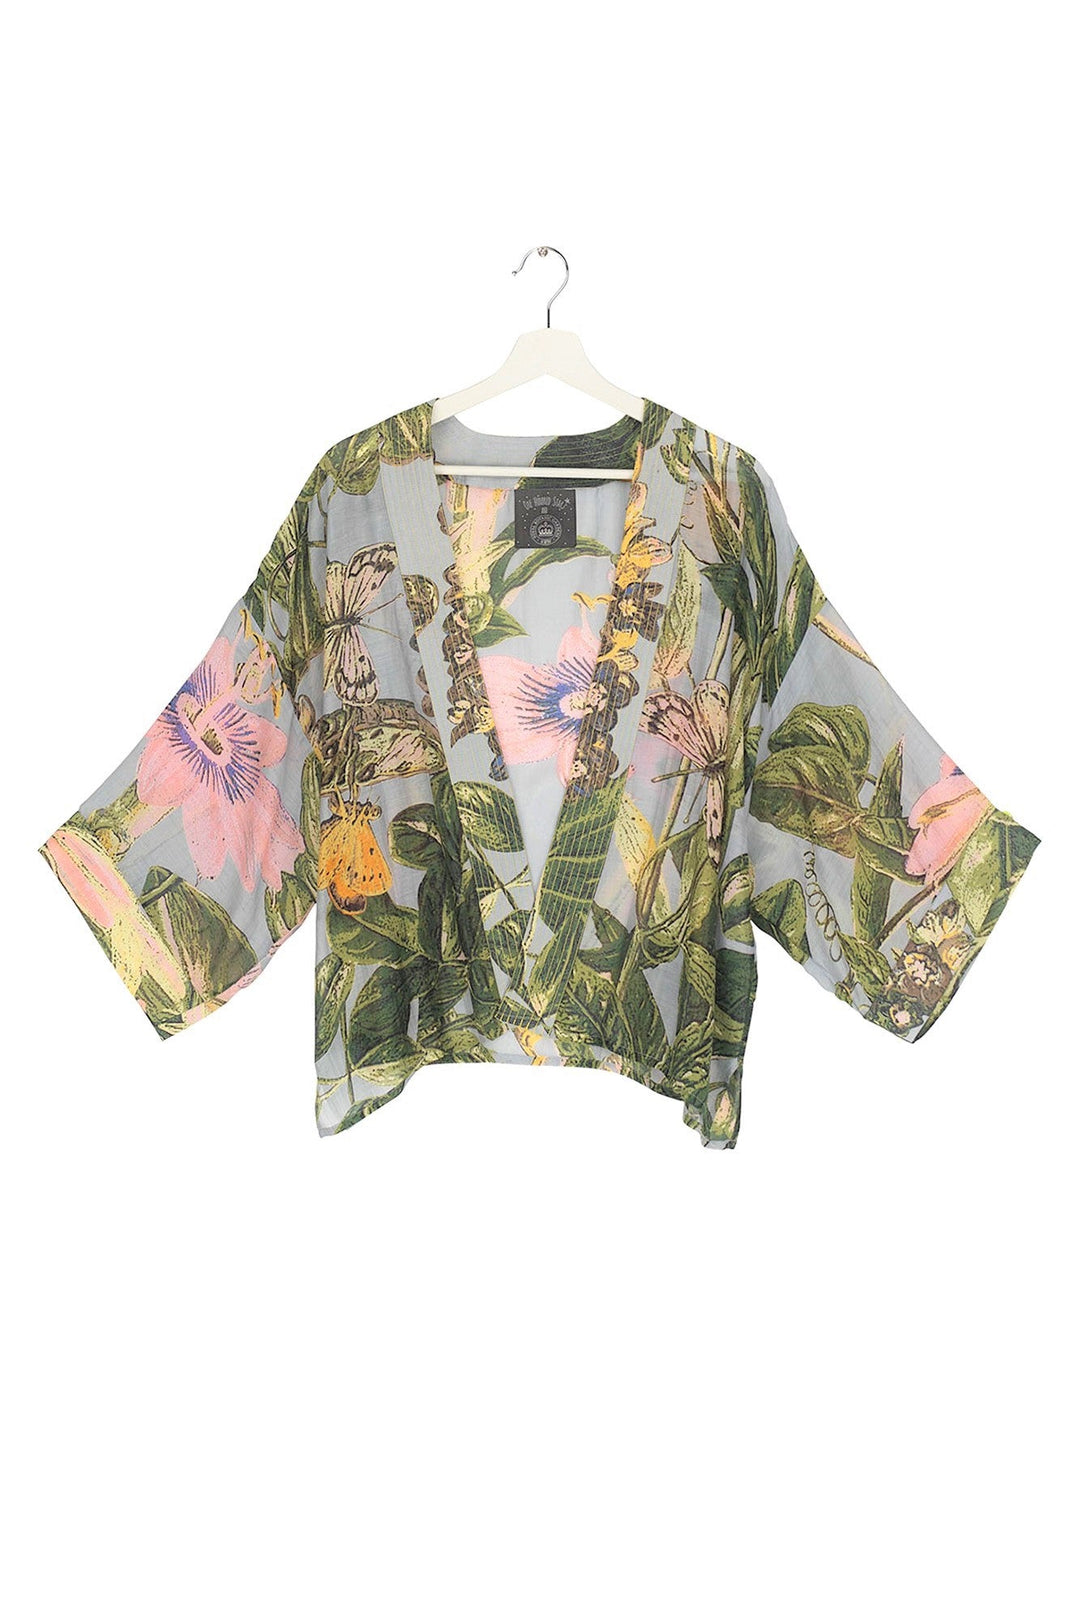 Marianne North Chilli Plant Kimono- Our bestselling kimono jackets have loose ¾ length sleeves, an open front and a lightly embroidered lapel. Pair with a matching camisole and your favourite jeans in summer or layer over a polo neck during the cooler months.